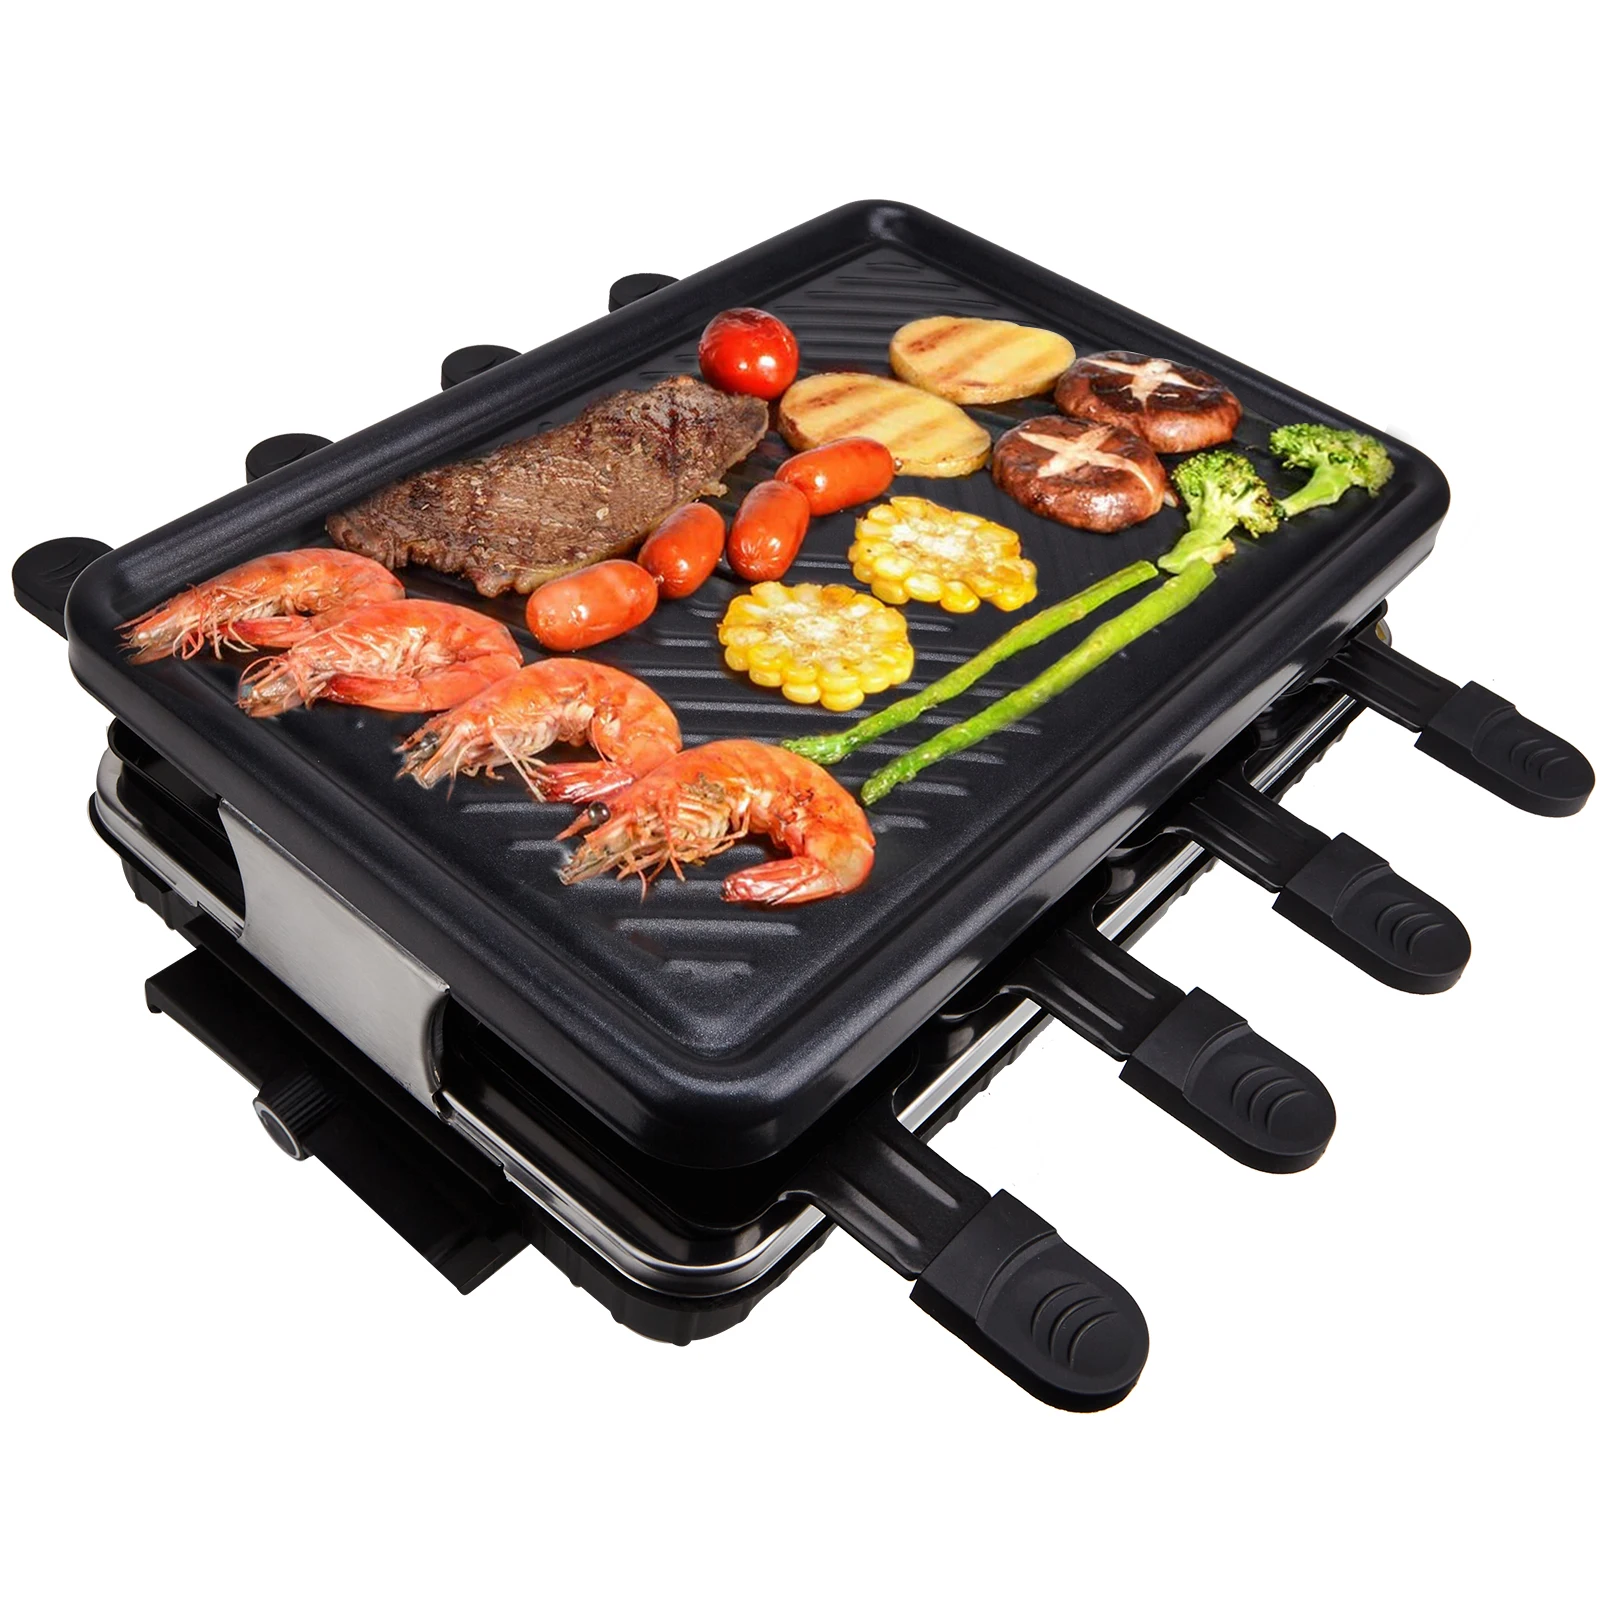 https://ae01.alicdn.com/kf/Sb346397c07c145f0a738b49702e035a4g/Table-Grill-Electric-Korean-BBQ-Grill-Indoor-Cheese-Raclette-For-8-Person-Non-Stick-Surface-Temperature.jpg